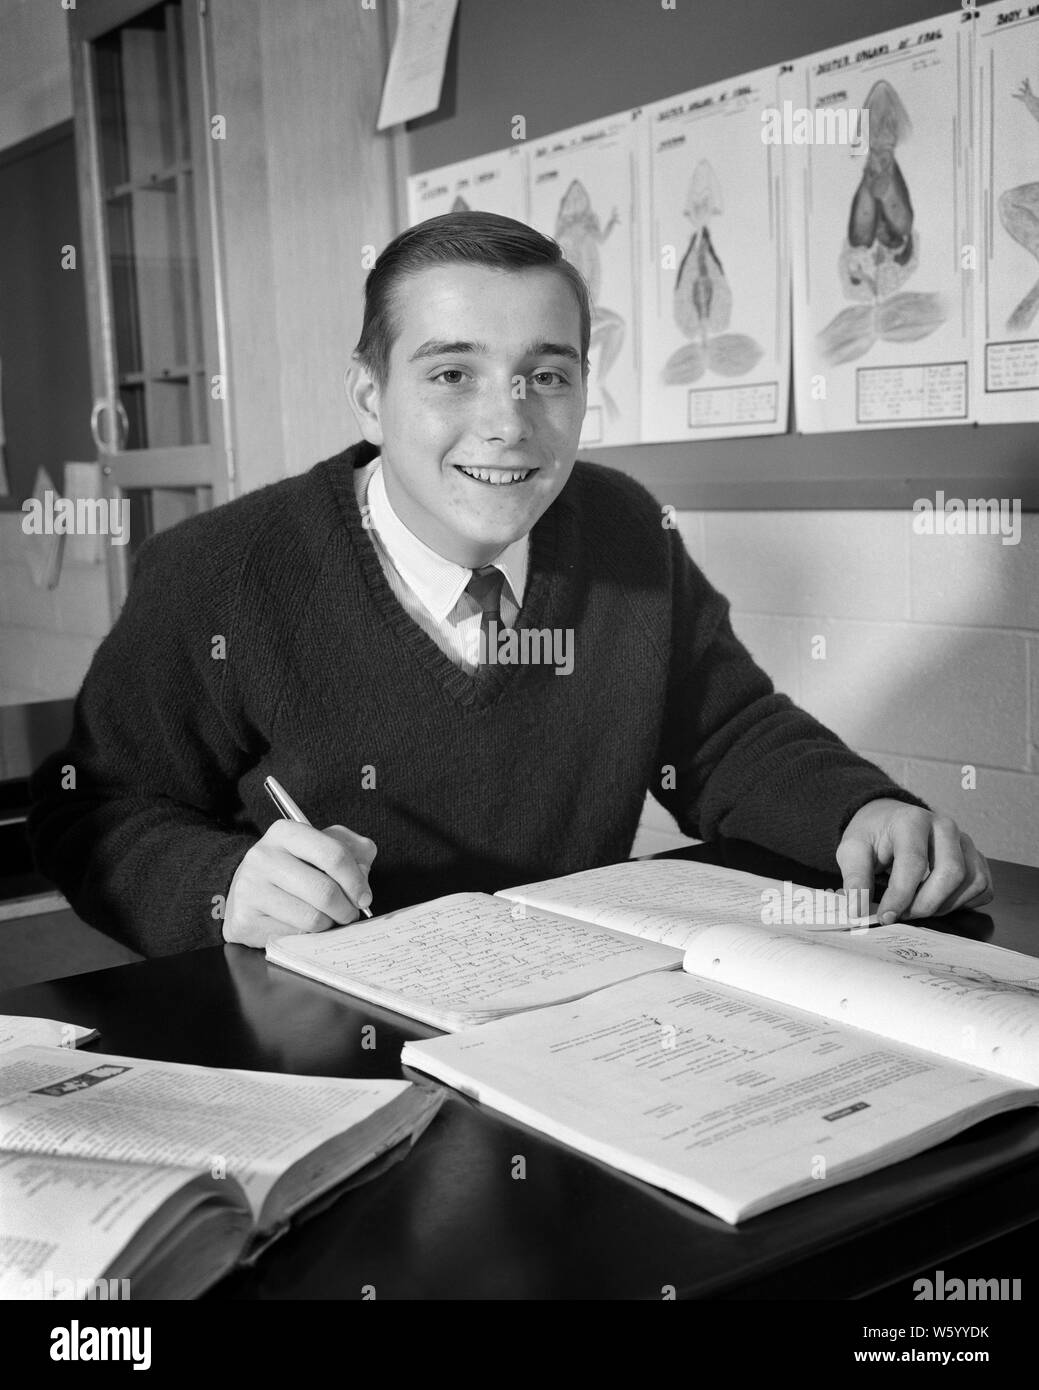 1960s SMILING BOY STUDENT IN BIOLOGY CLASS READING  BOOK TAKE NOTES  IN NOTEBOOK - s15401 HAR001 HARS INFORMATION PLEASED JOY LIFESTYLE COPY SPACE HALF-LENGTH PERSONS INSPIRATION BIOLOGY MALES TEENAGE BOY CONFIDENCE EXPRESSIONS B&W EYE CONTACT SUCCESS HAPPINESS CHEERFUL DISCOVERY STRENGTH EXCITEMENT KNOWLEDGE PROGRESS DIRECTION PRIDE IN OPPORTUNITY HIGH SCHOOL SMILES HIGH SCHOOLS CONCEPTUAL STILL LIFE TAKING NOTES INVOLVED JOYFUL STYLISH TEENAGED EAGER GROWTH JUVENILES BLACK AND WHITE CAUCASIAN ETHNICITY HAR001 OLD FASHIONED Stock Photo